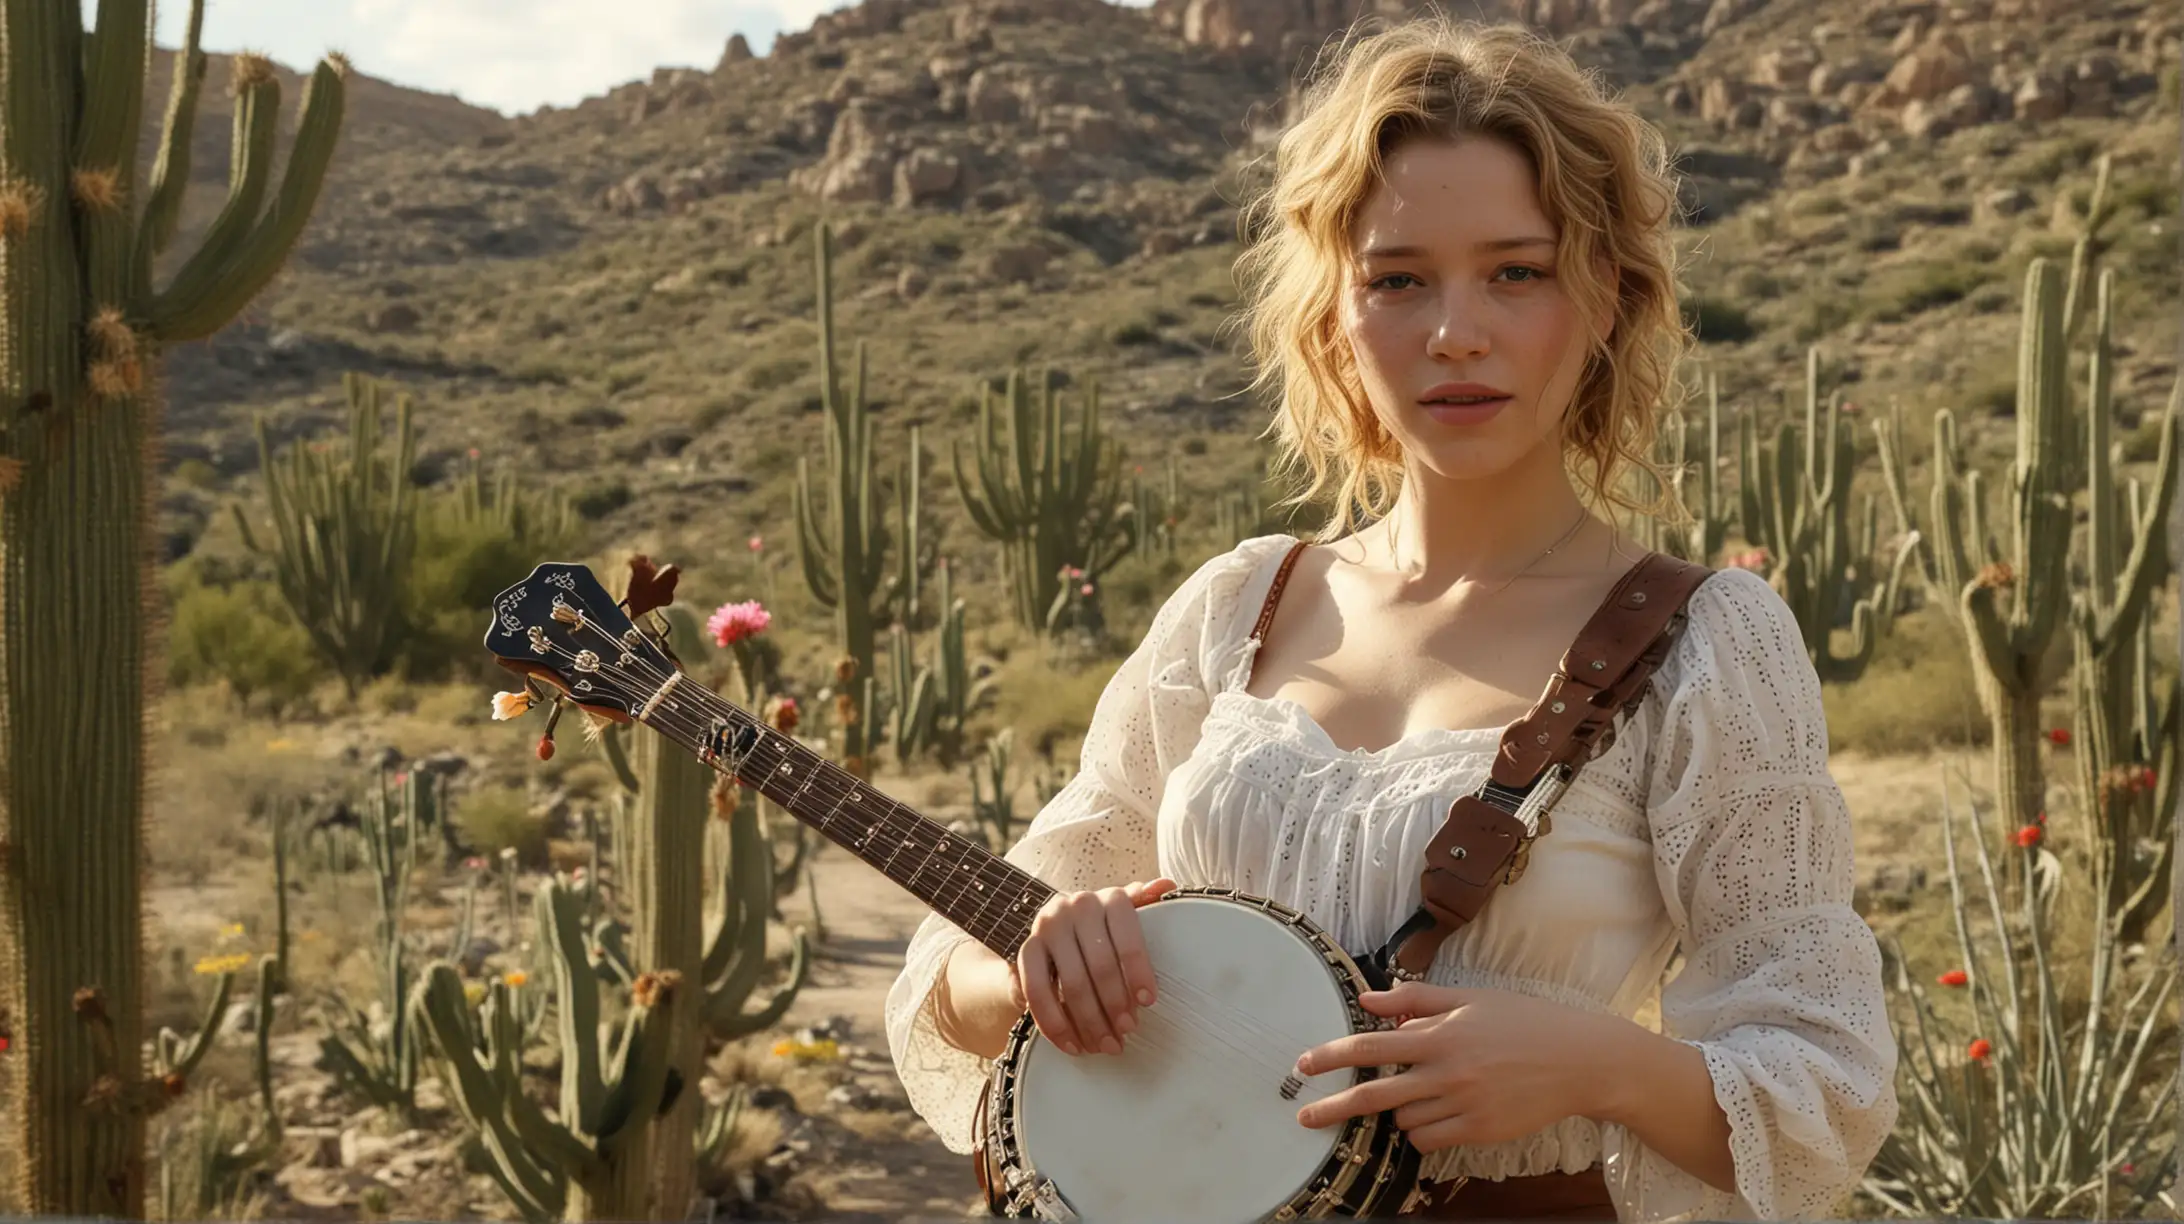 Léa Seydoux, 5 fingers, playing banjo, freckles, perky figure, big boobs, sexy, outdoors, seductive pose, natural lighting, Wild West, prairie, huge blooming cacti